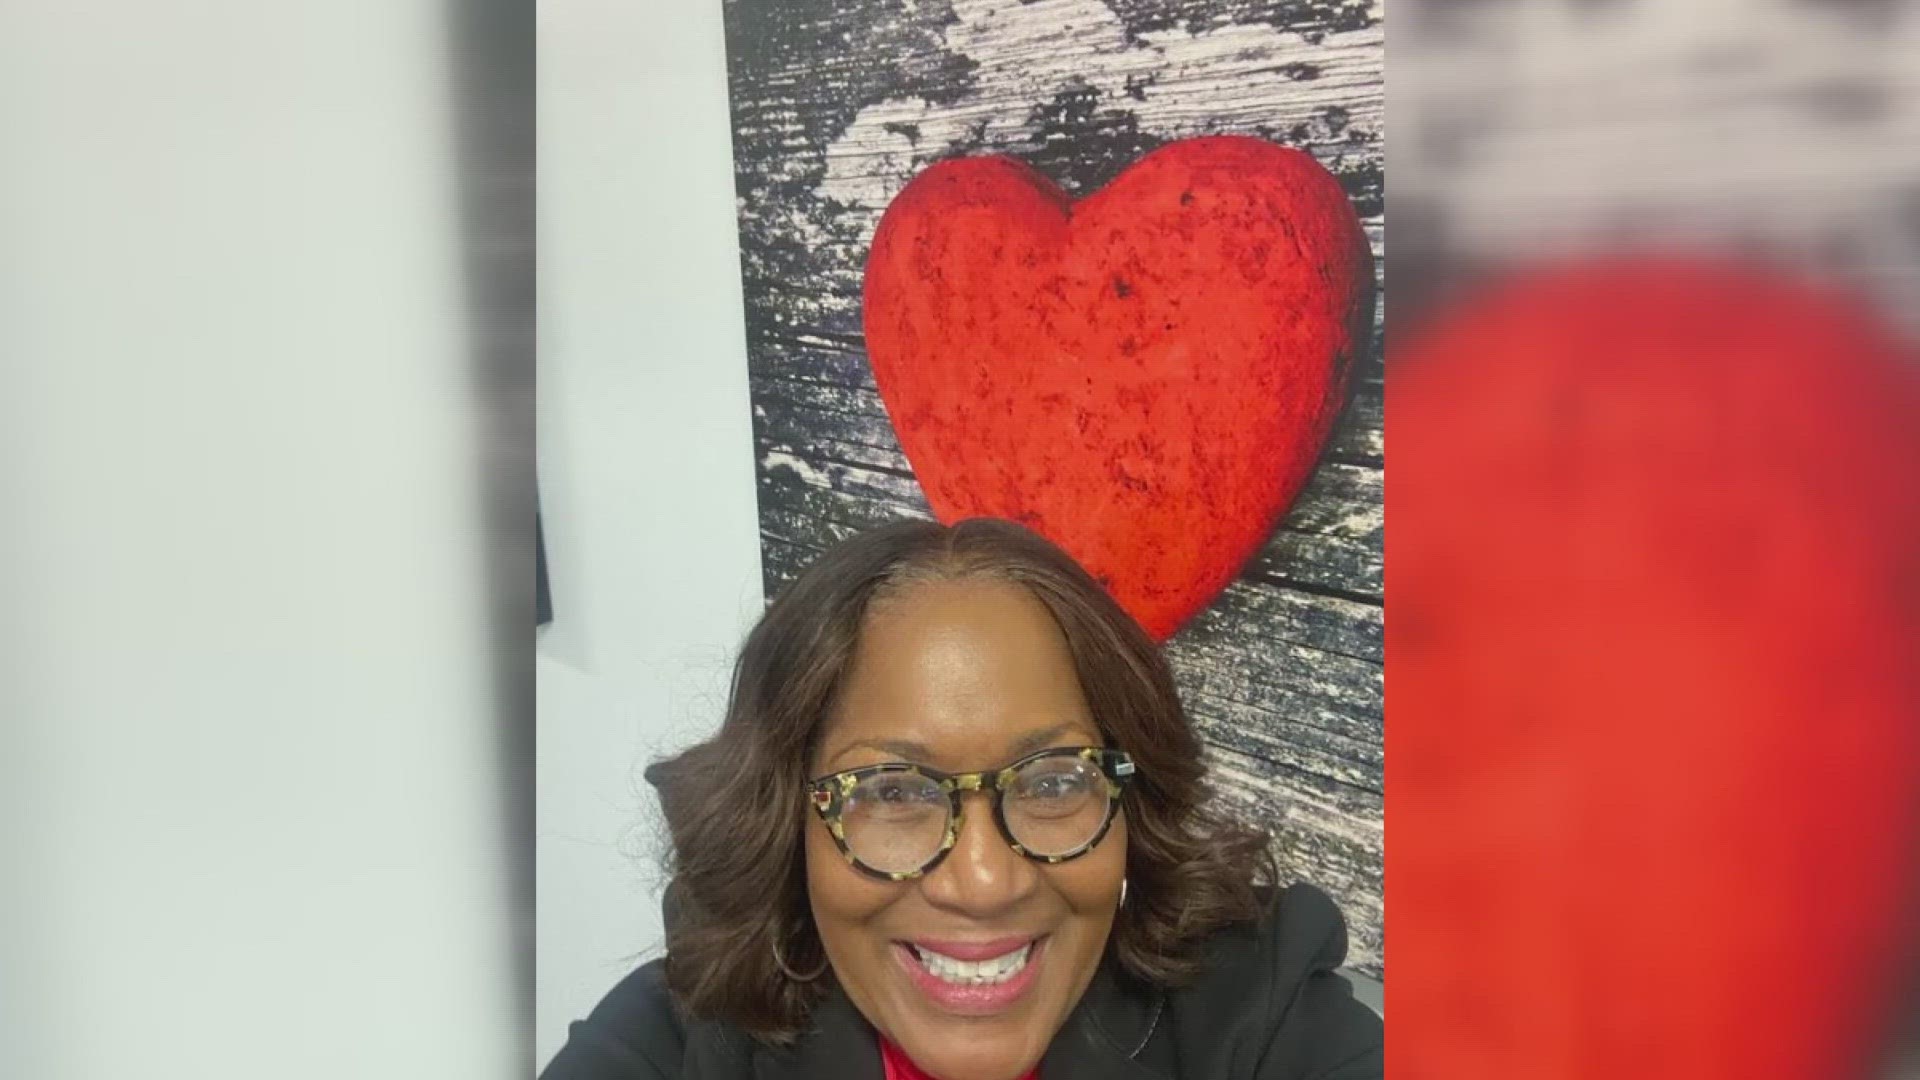 A St. Louis woman shares her inspiring recovery from cardiovascular disease. She said she wants her third chance at life to turn on the lightbulb for others.